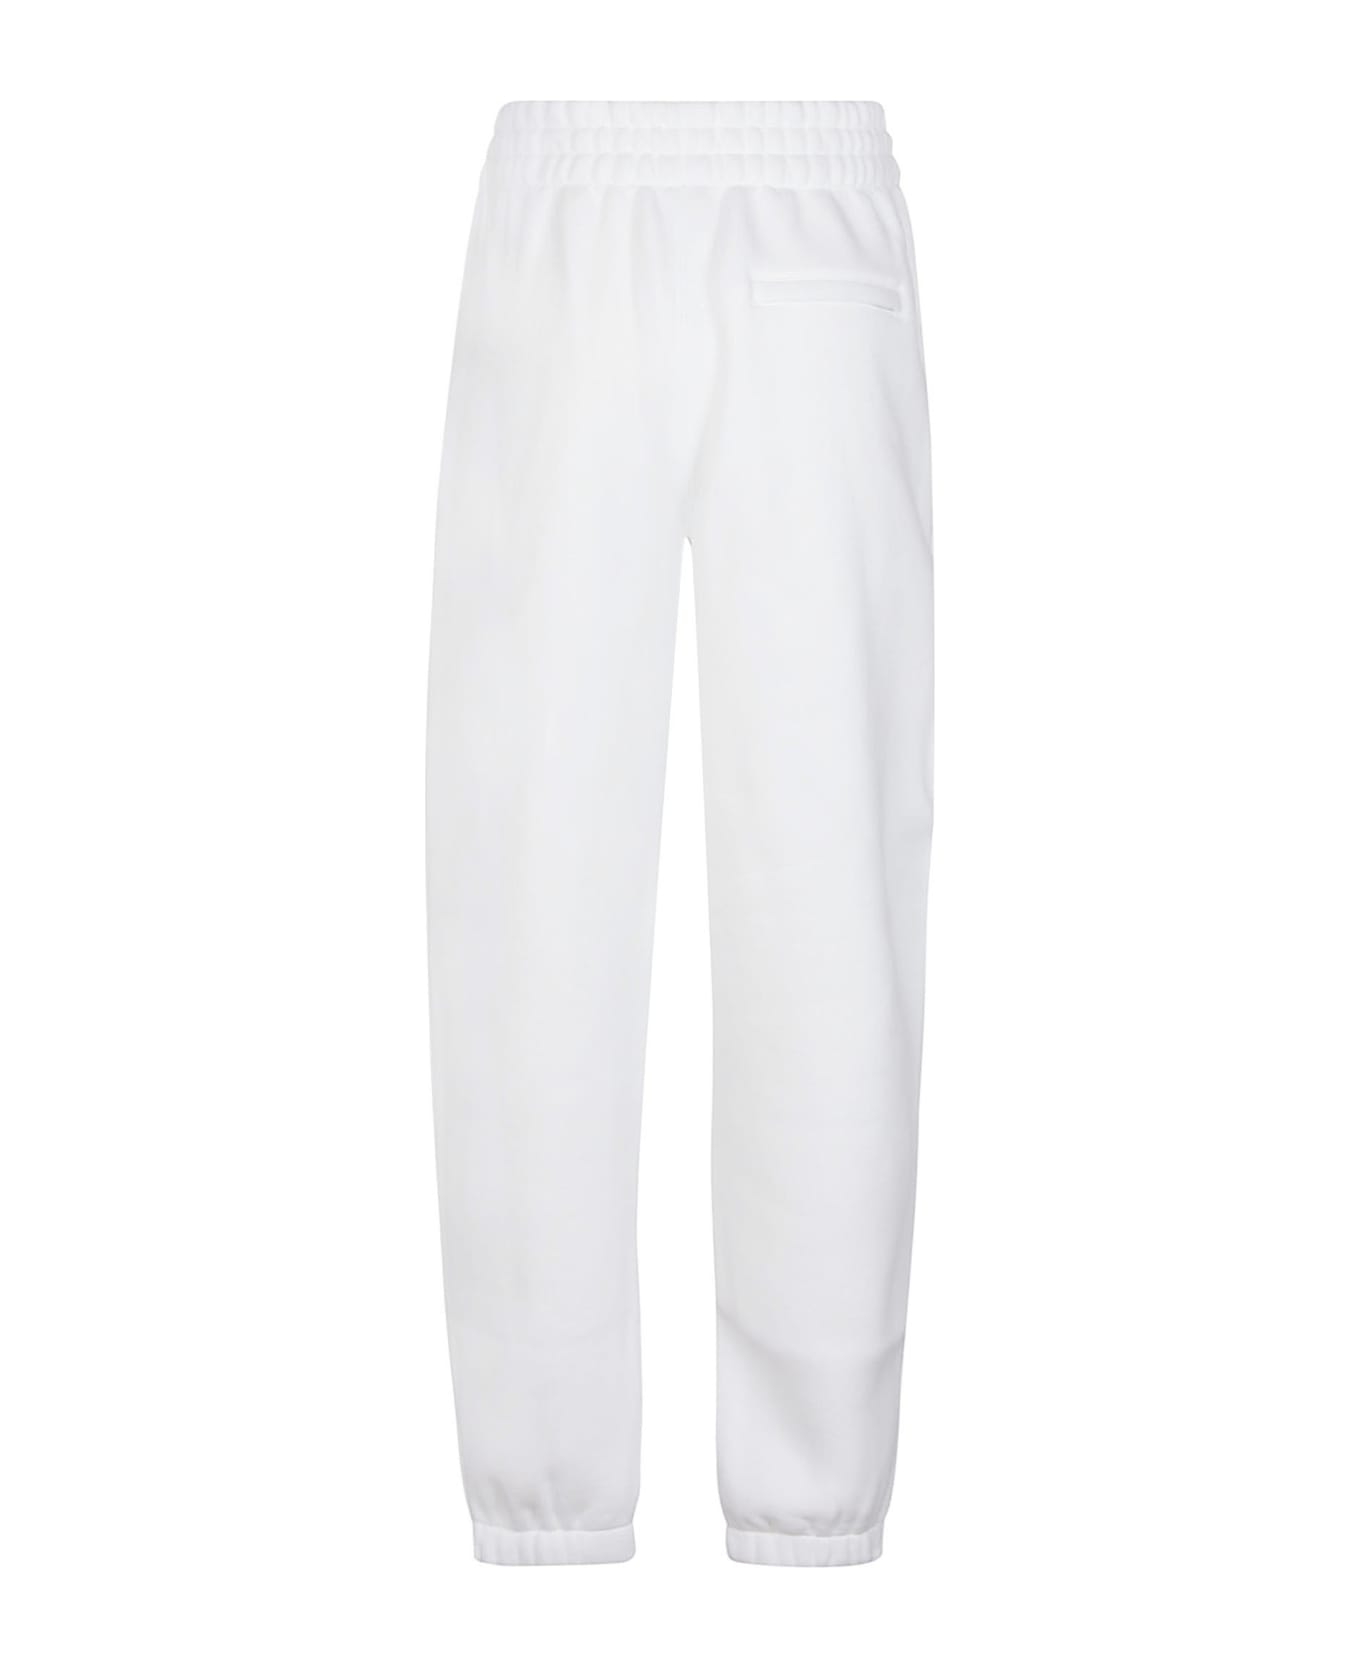 T by Alexander Wang Puff Paint Logo Esential Terry Classic Sweatpant - White